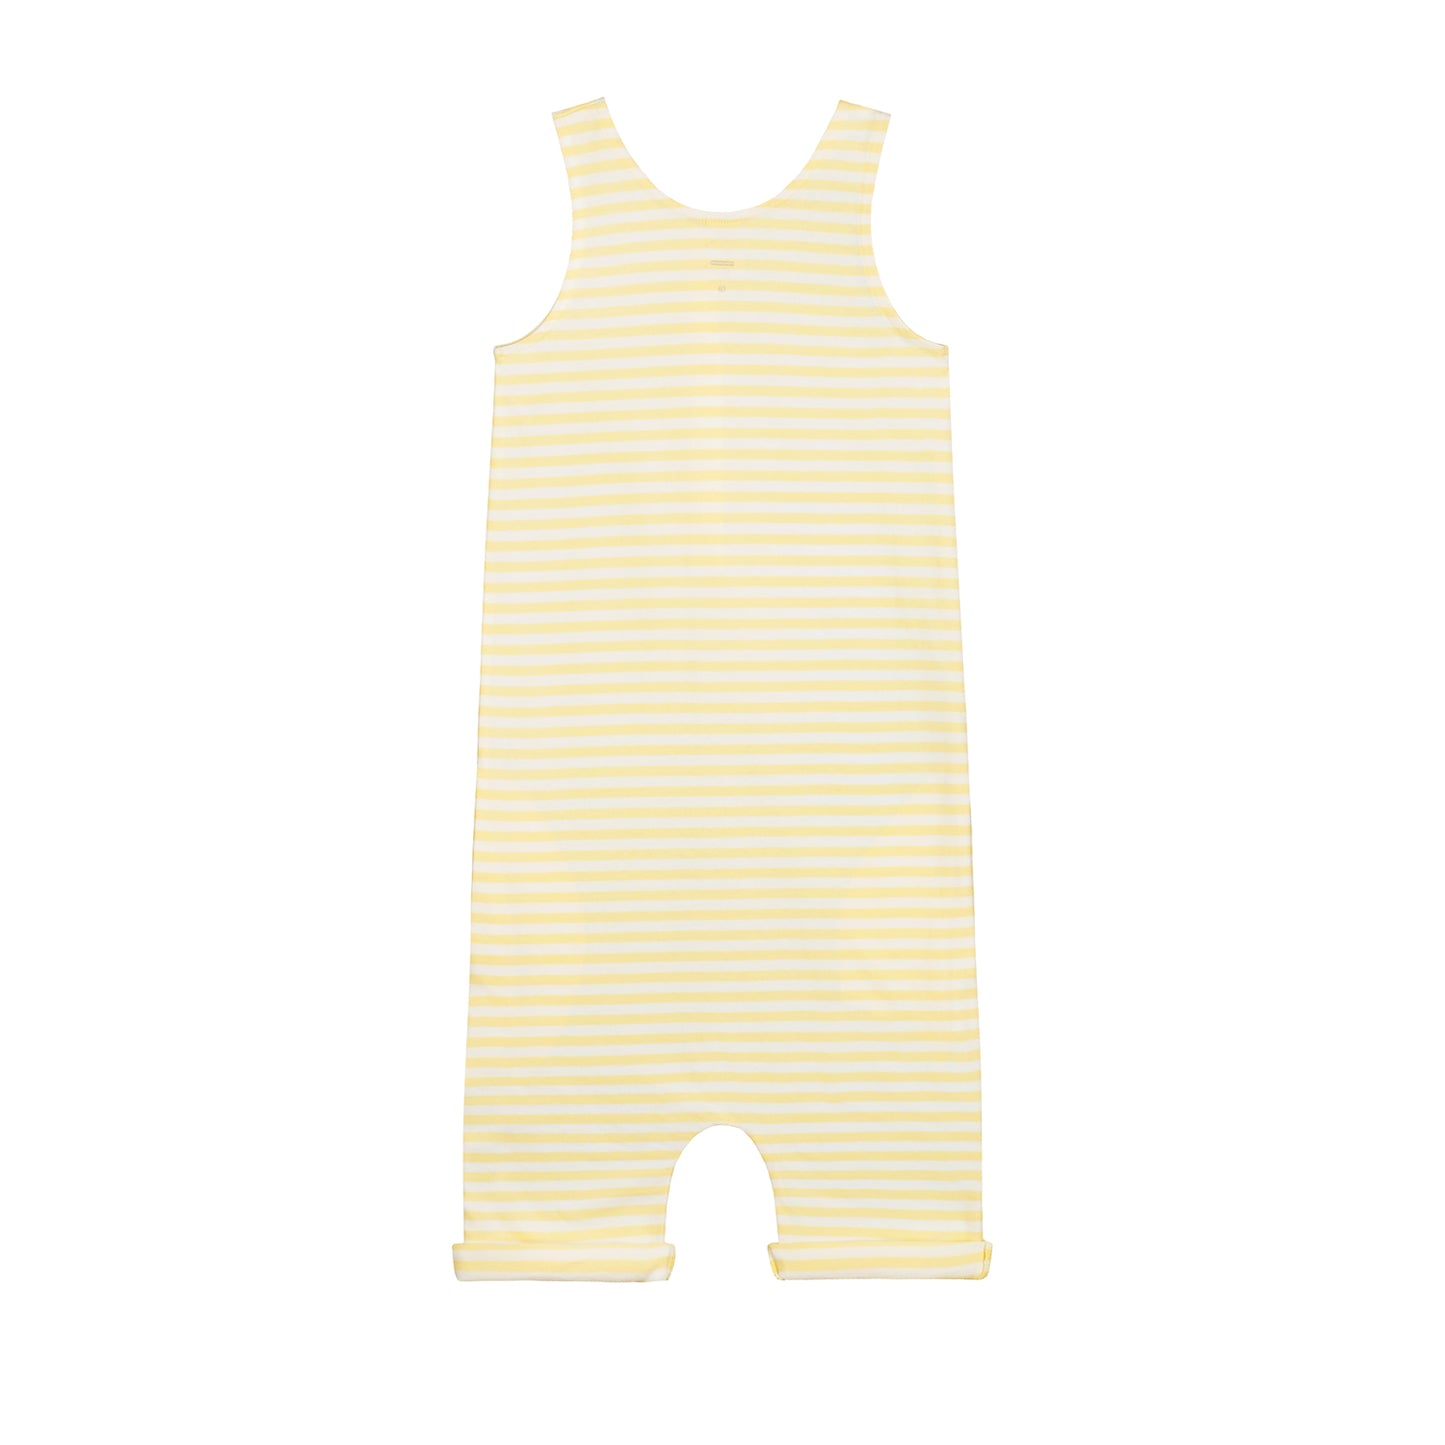 Gray Label, Sleeveless Tank Suit, Mellow Yellow/Off White Stripe, Children’s clothing, sustainable children’s clothes, Nottinghamshire stockist, Gray Labell Stockist, midlands children’s store 